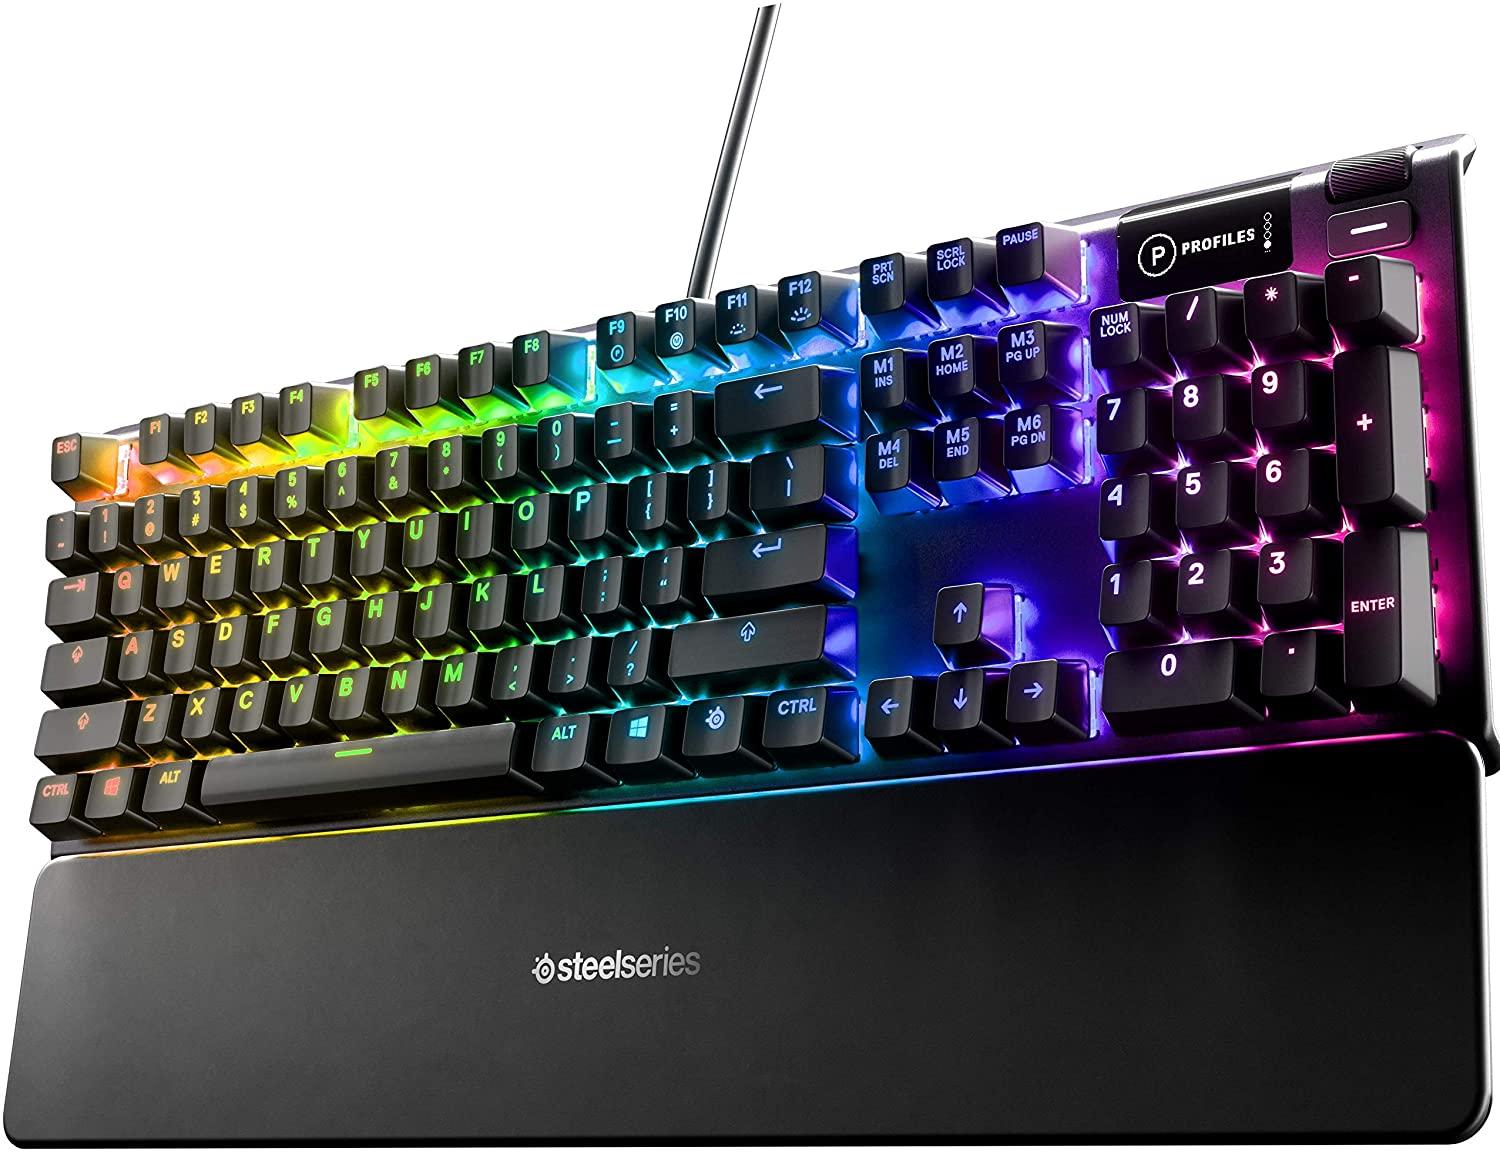 SteelSeries Apex 5 Hybrid RGB Mechanical Gaming Keyboard for $64.99 Shipped